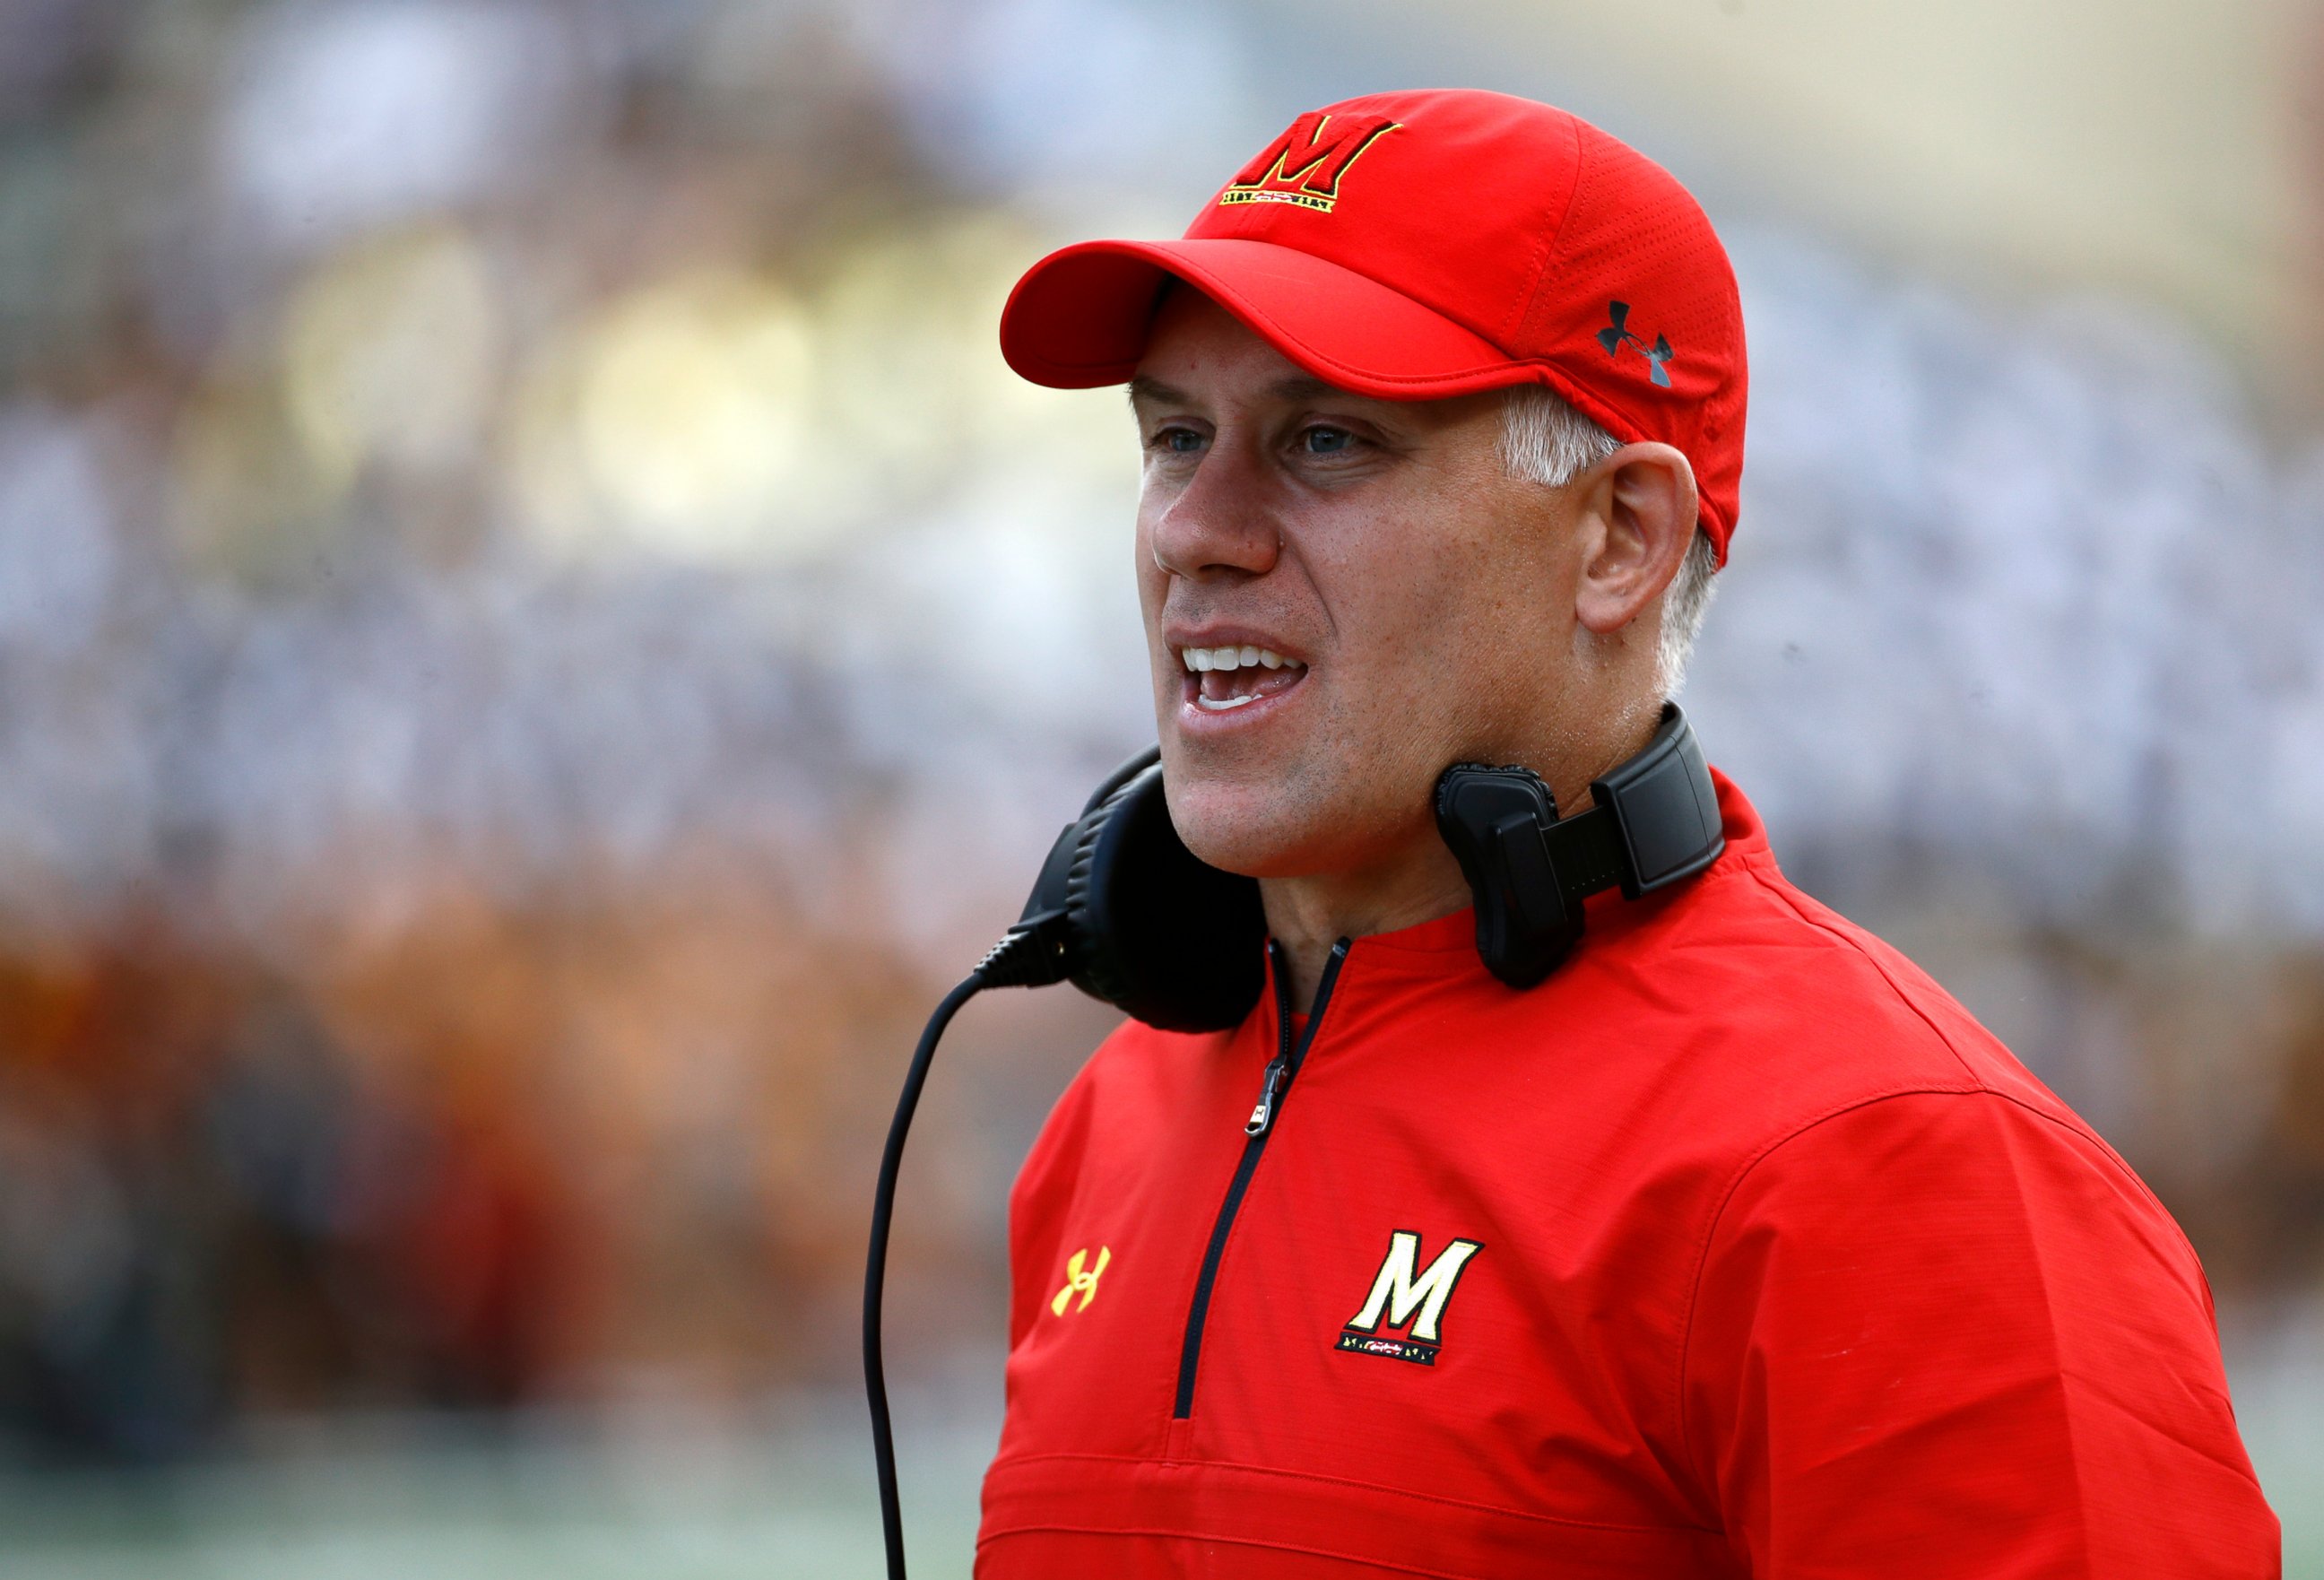 PHOTO: Maryland head coach DJ Durkin stands on the sideline during an NCAA college football game against Towson in College Park, Md.